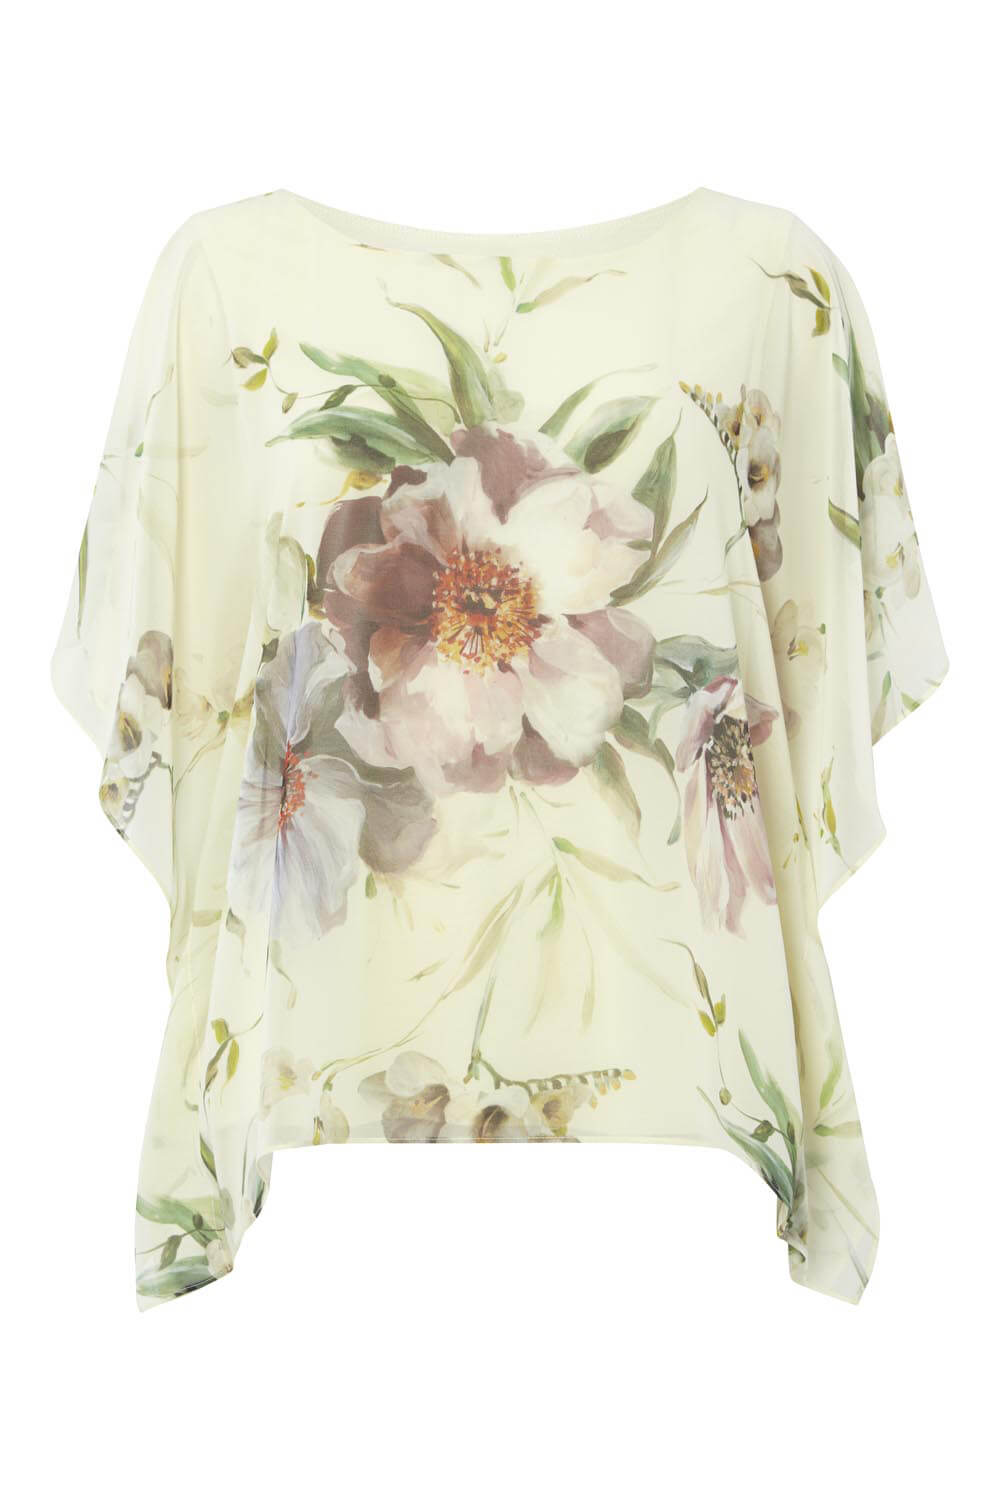 Cream  Floral Print Asymmetric Overlay Top, Image 5 of 5